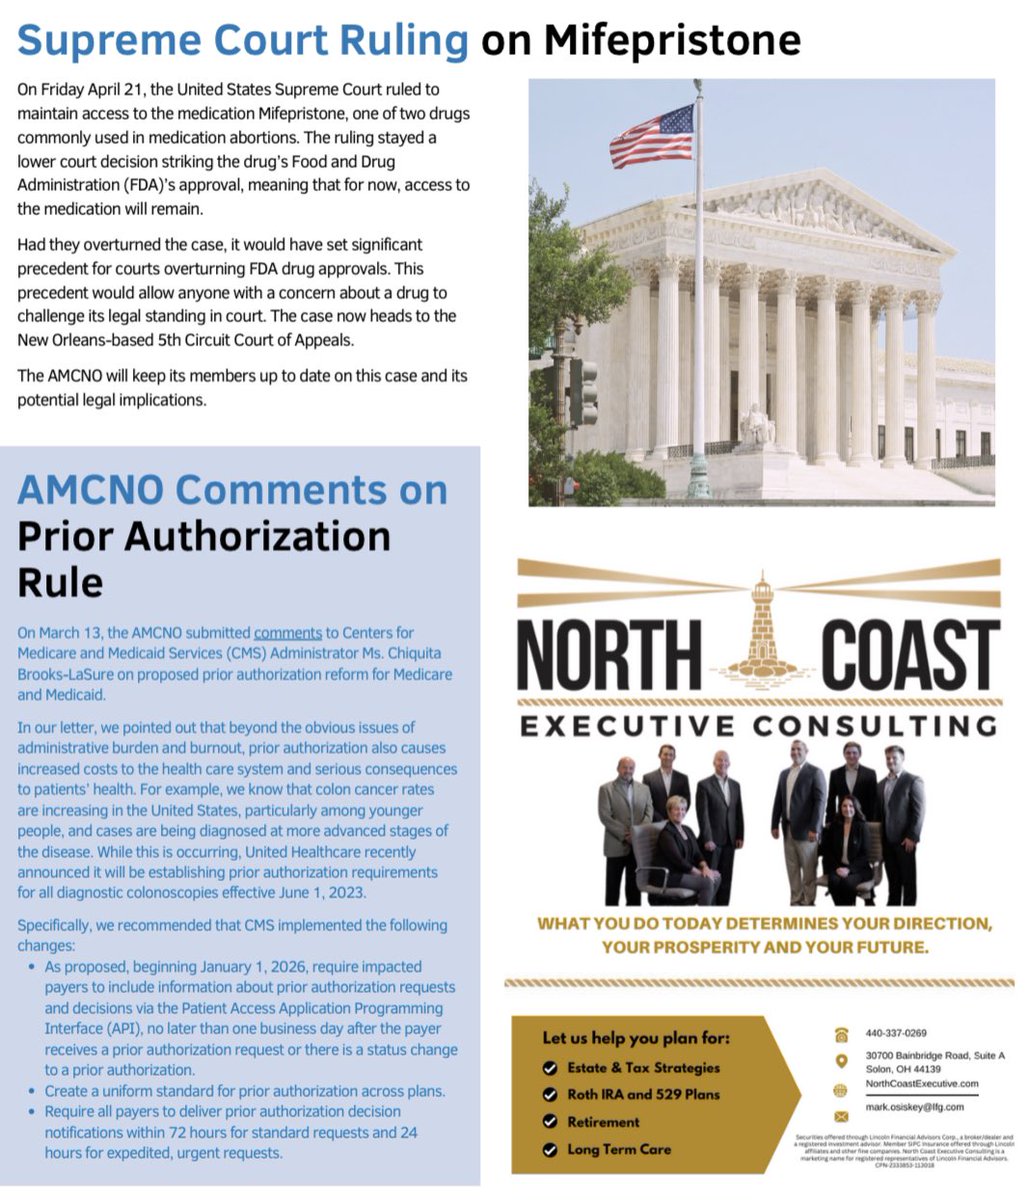 Read our federal legislative update and more in the latest edition of the Northern Ohio Physician: amcno.org/assets/NOP-ima…! #PriorAuthorization #Advocacy #Cleveland